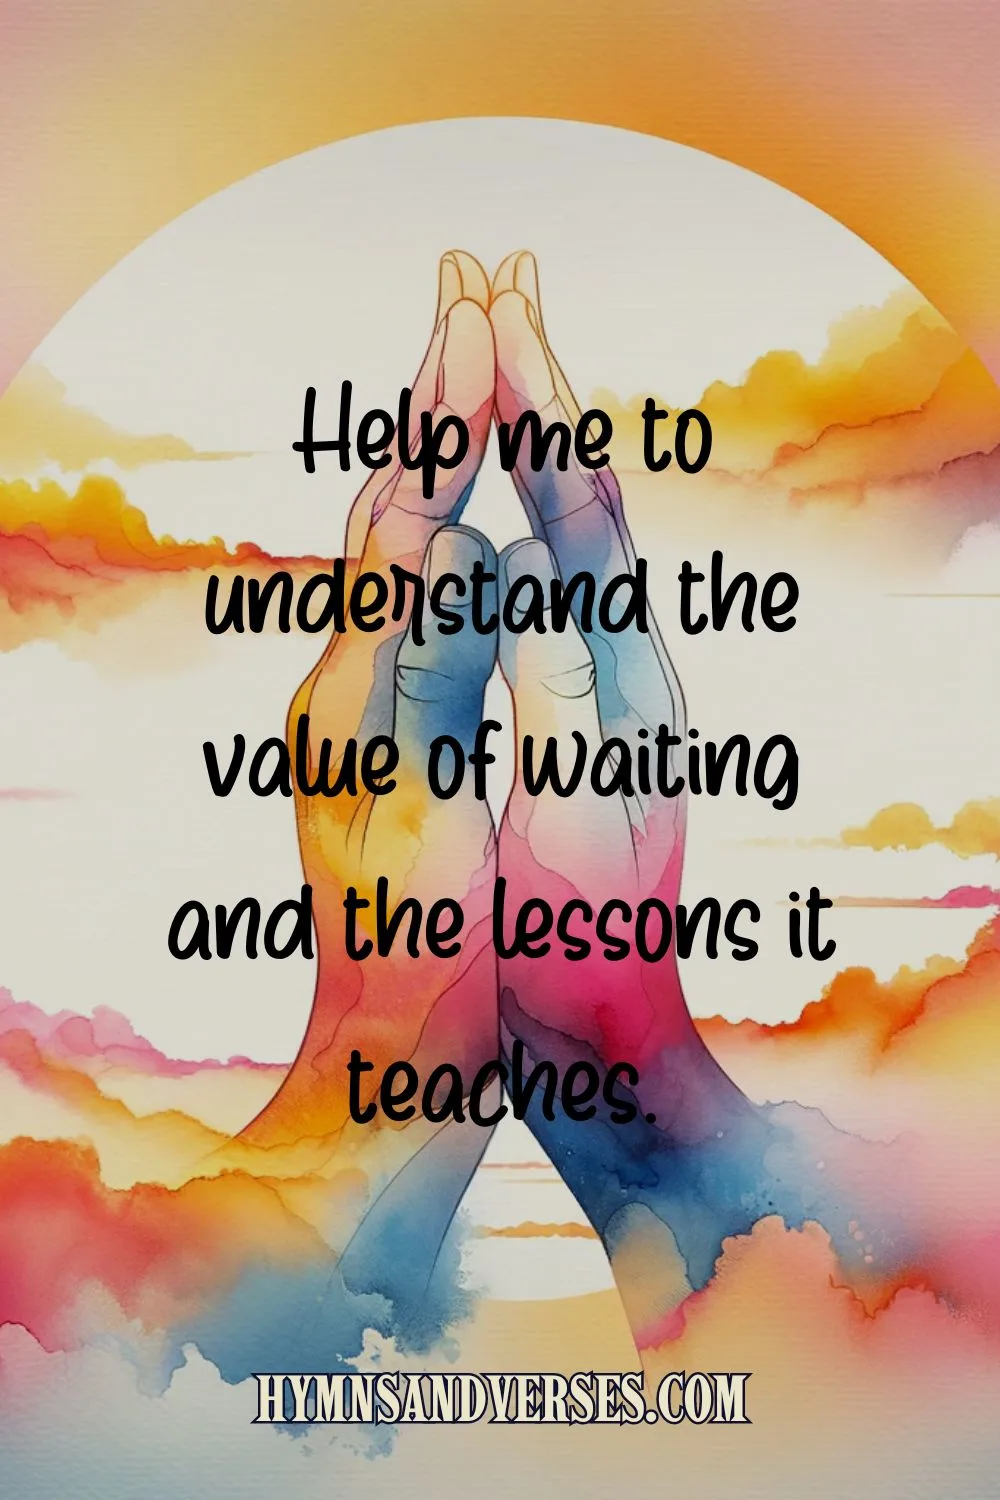 Quote image for the post, features the words: Help me to understand the value of waiting and the lessons it teaches.